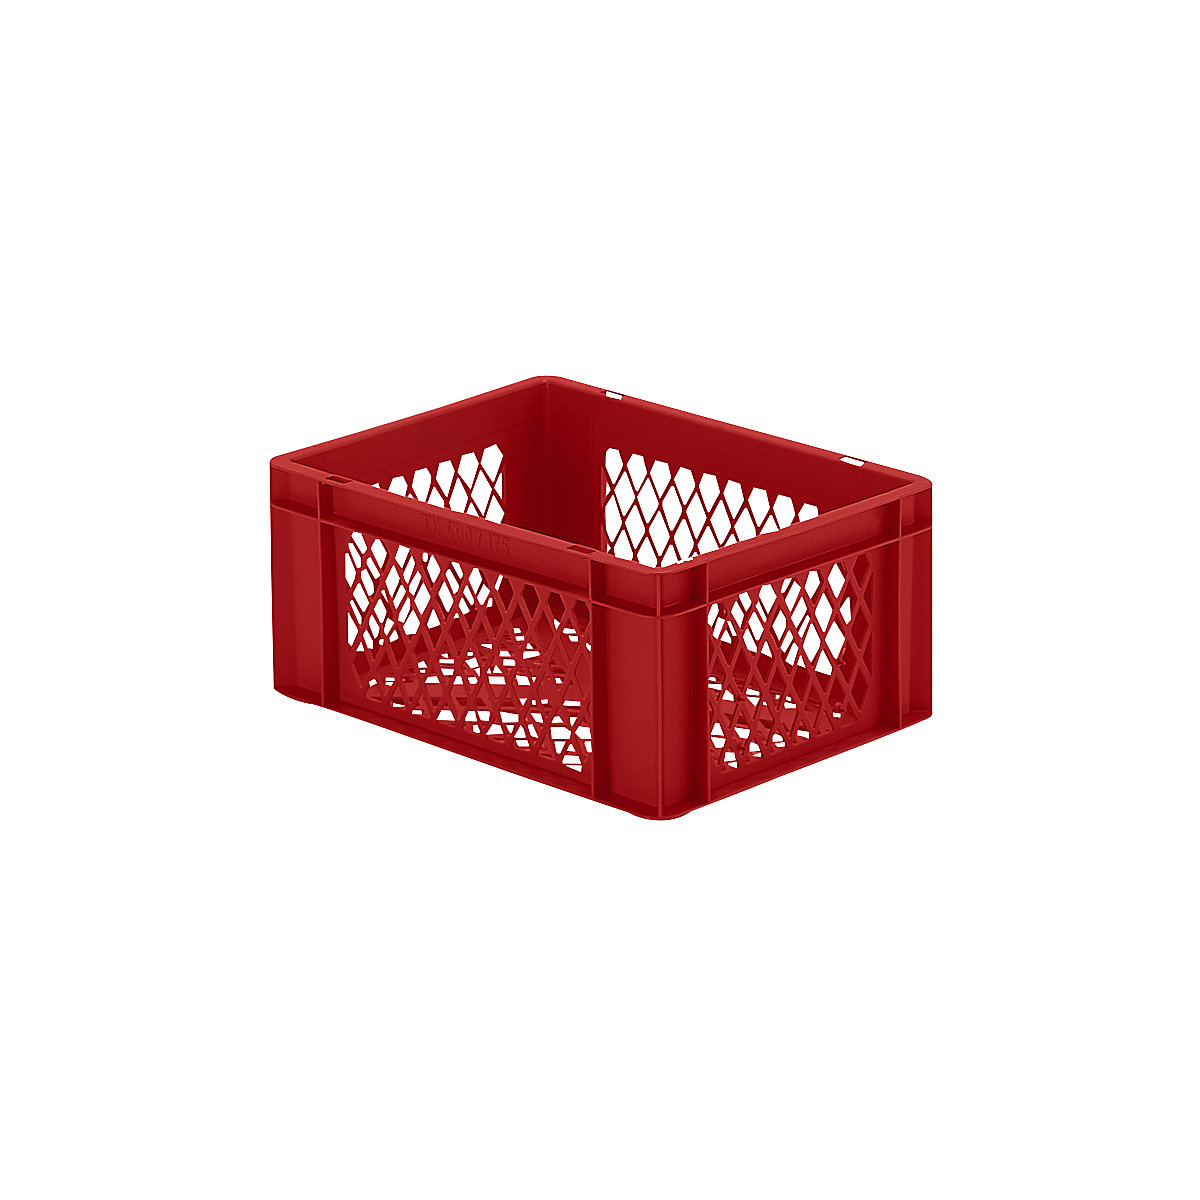 Euro stacking container, perforated walls and base, LxWxH 400 x 300 x 175 mm, red, pack of 5